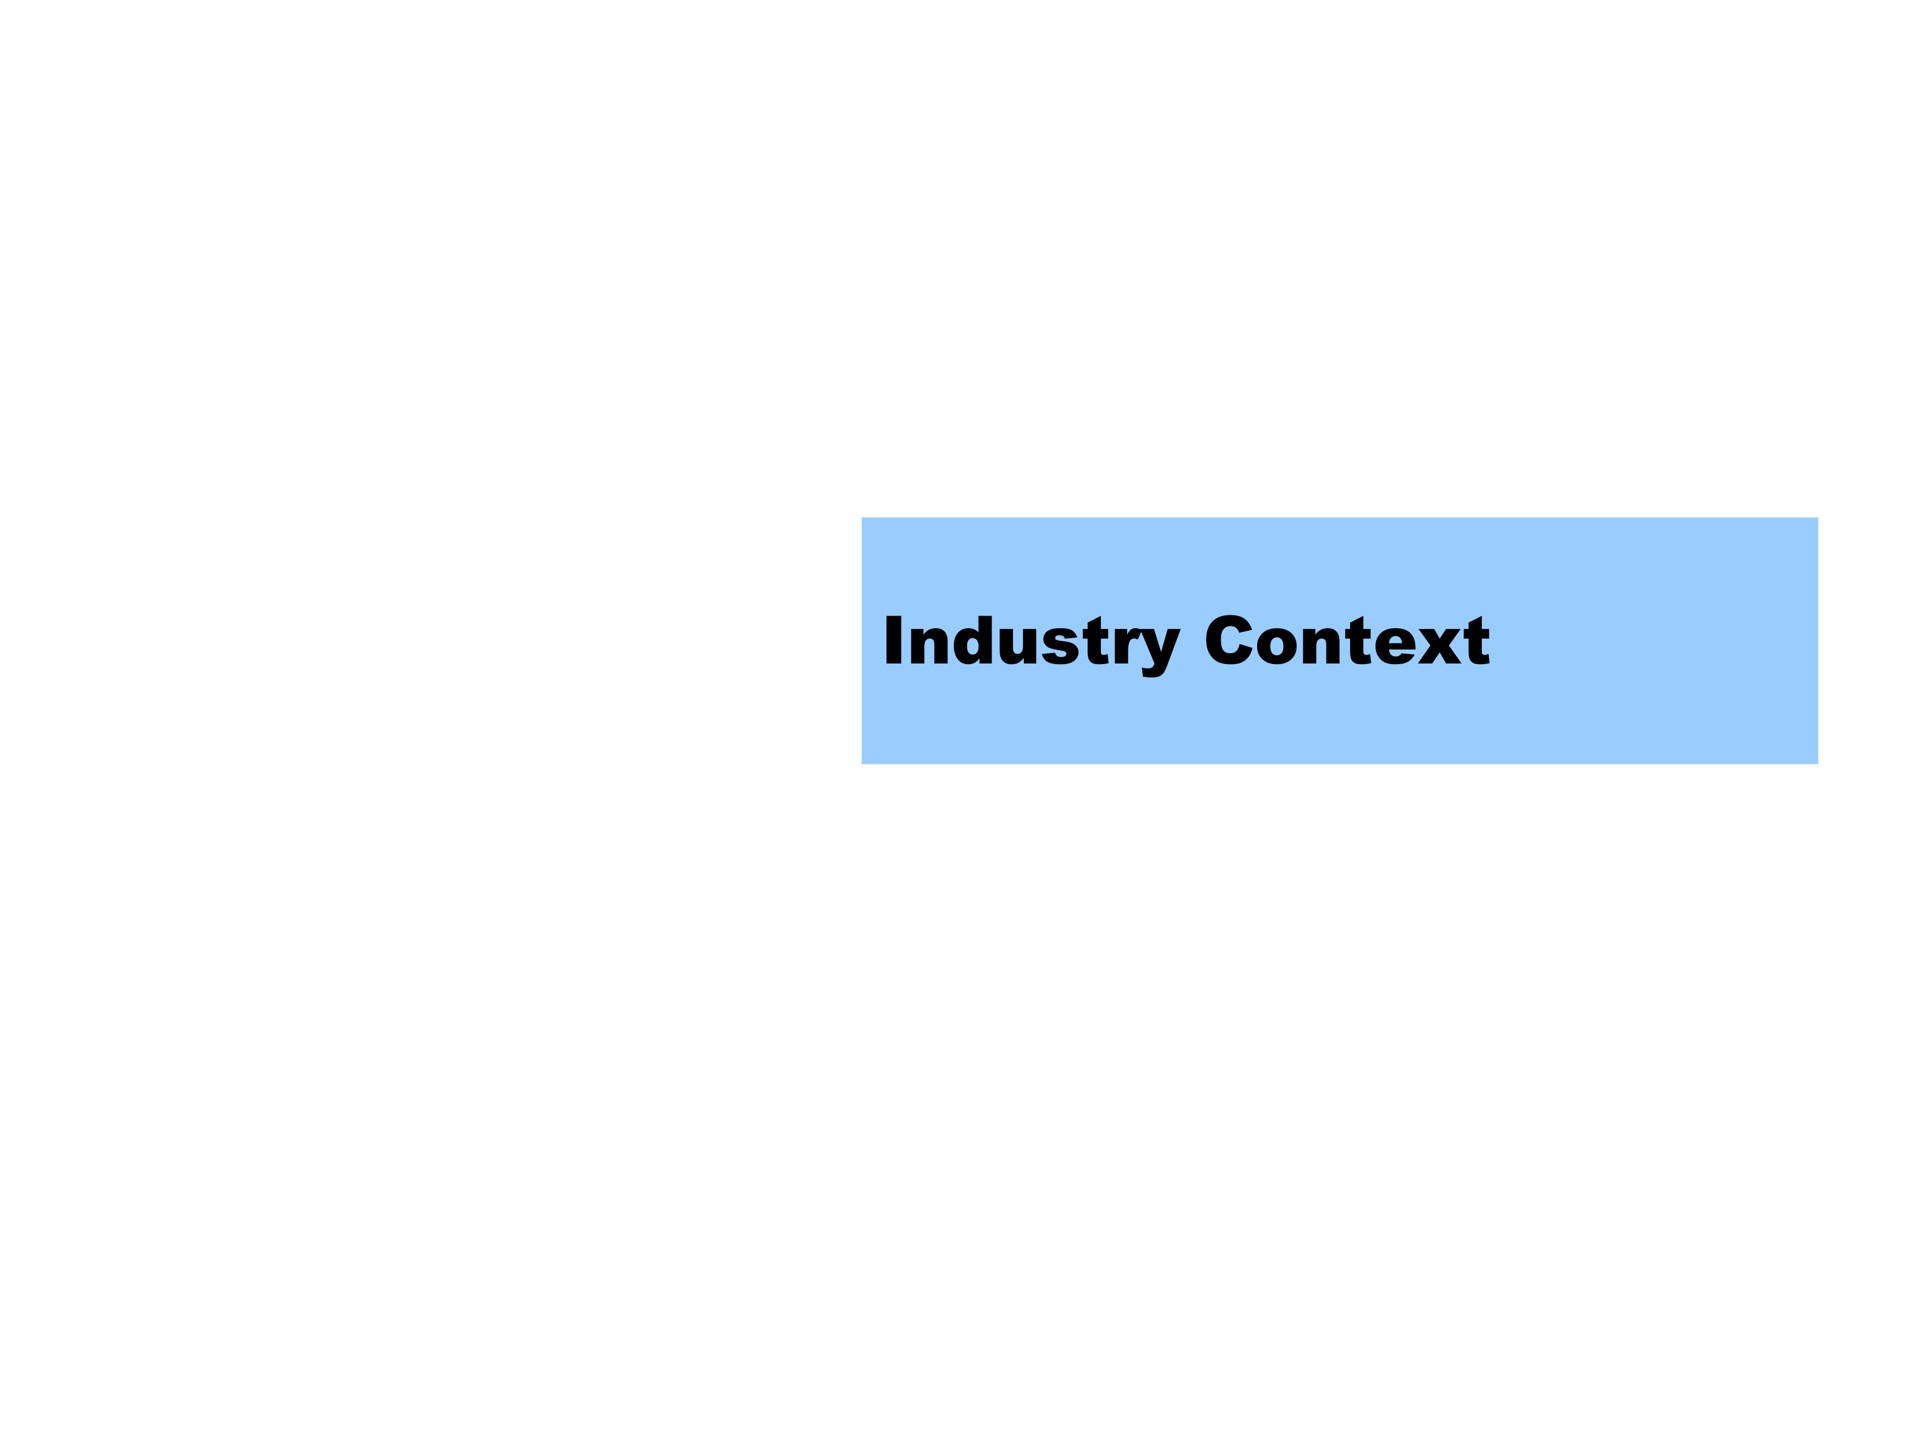 industry context | Pershing Square